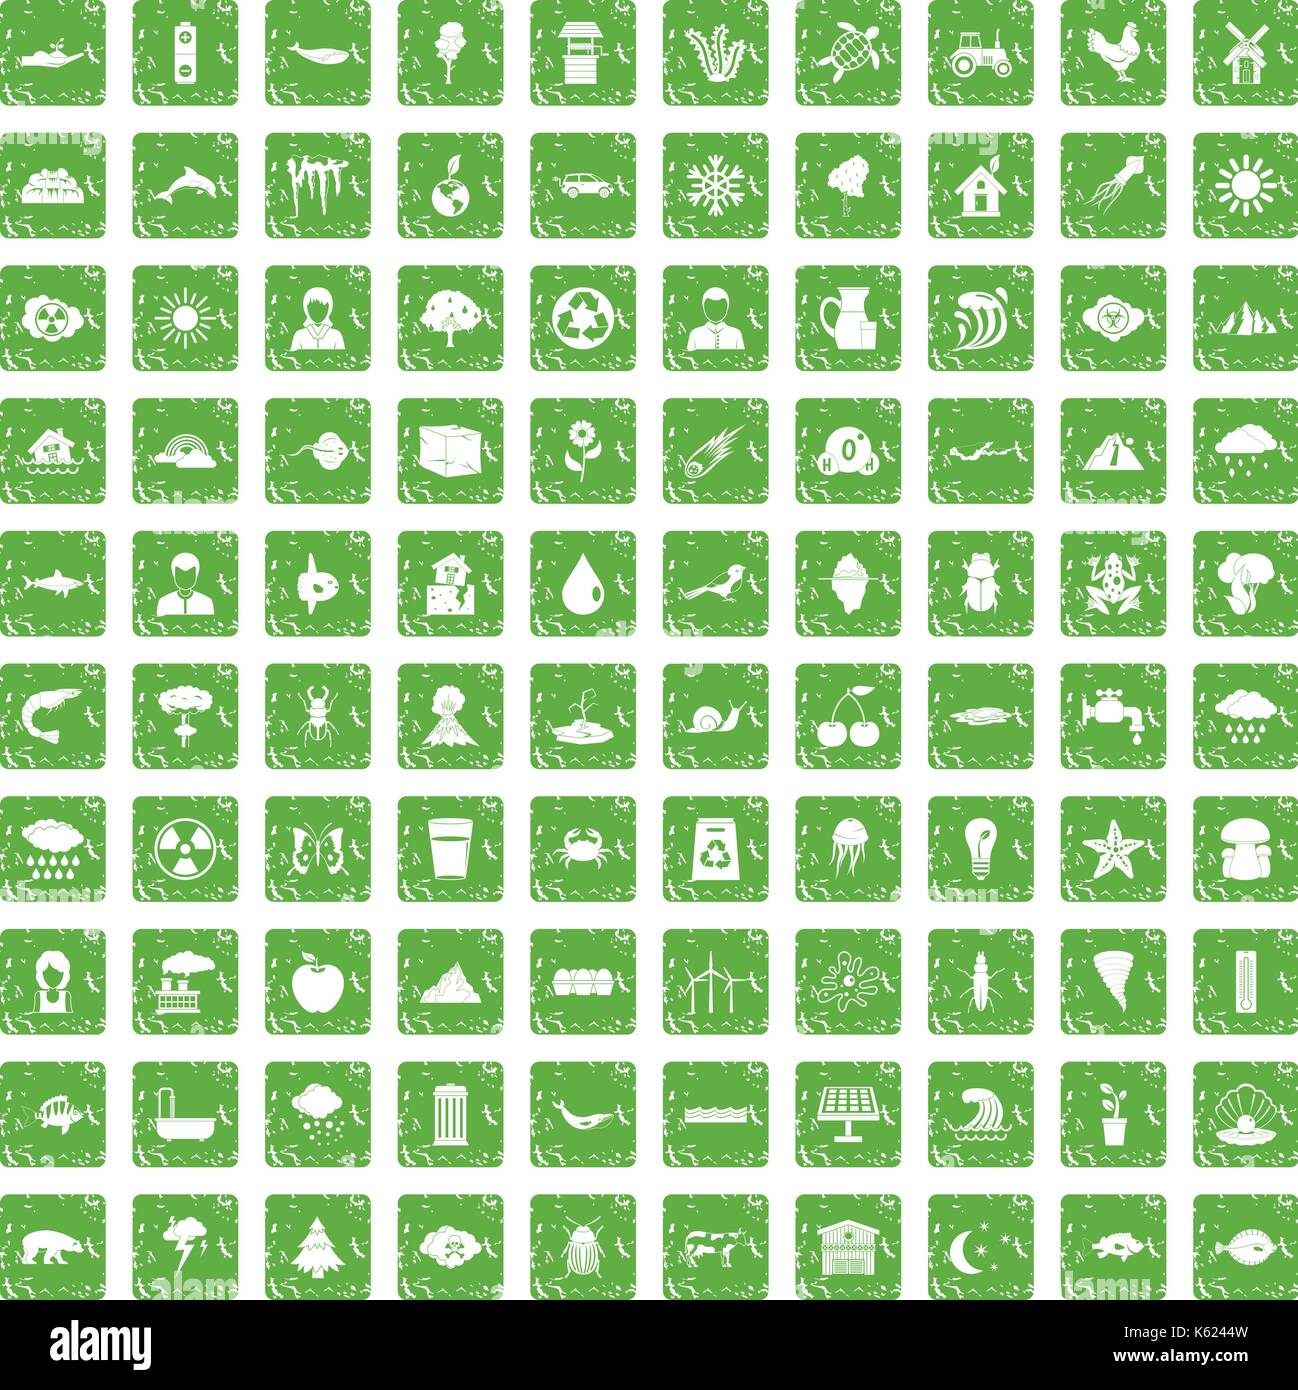 100 earth icons set grunge green Stock Vector